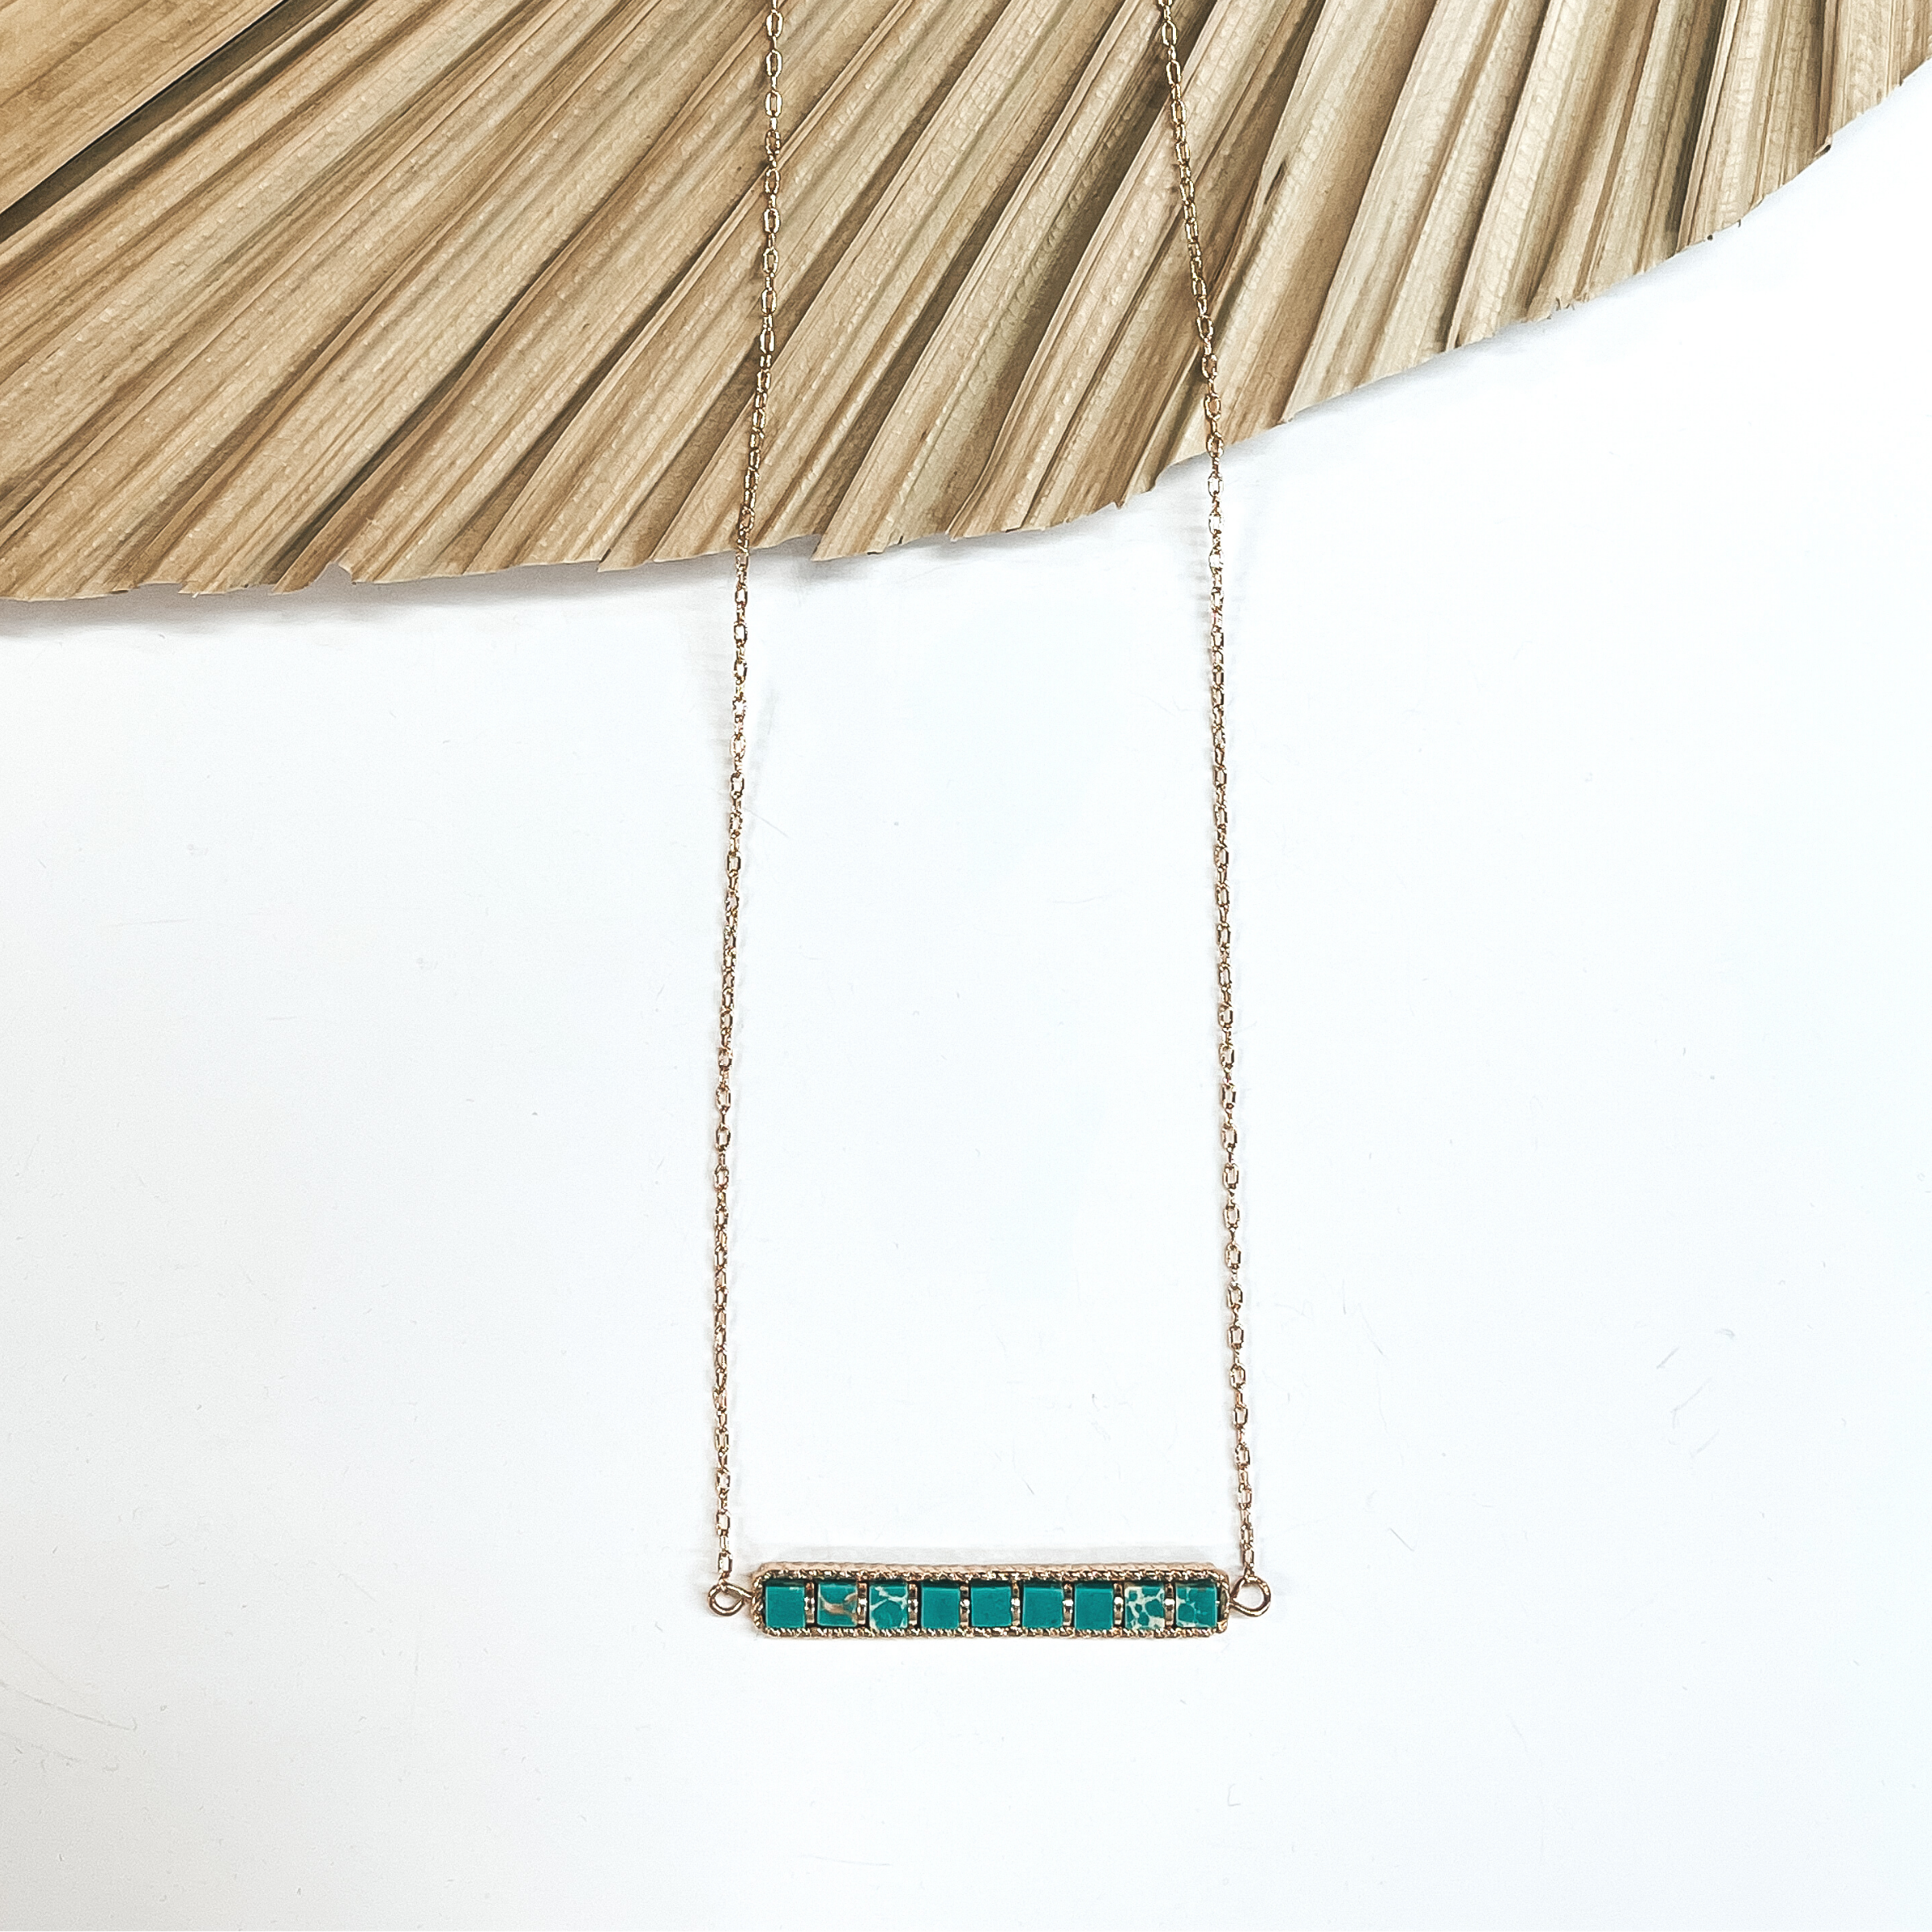 This is a gold necklace with a horizontal bar  pendant with semi-precious stones in tuquoise  in a gold setting. This necklace is taken laying on a dried up palm  leaf and white background.